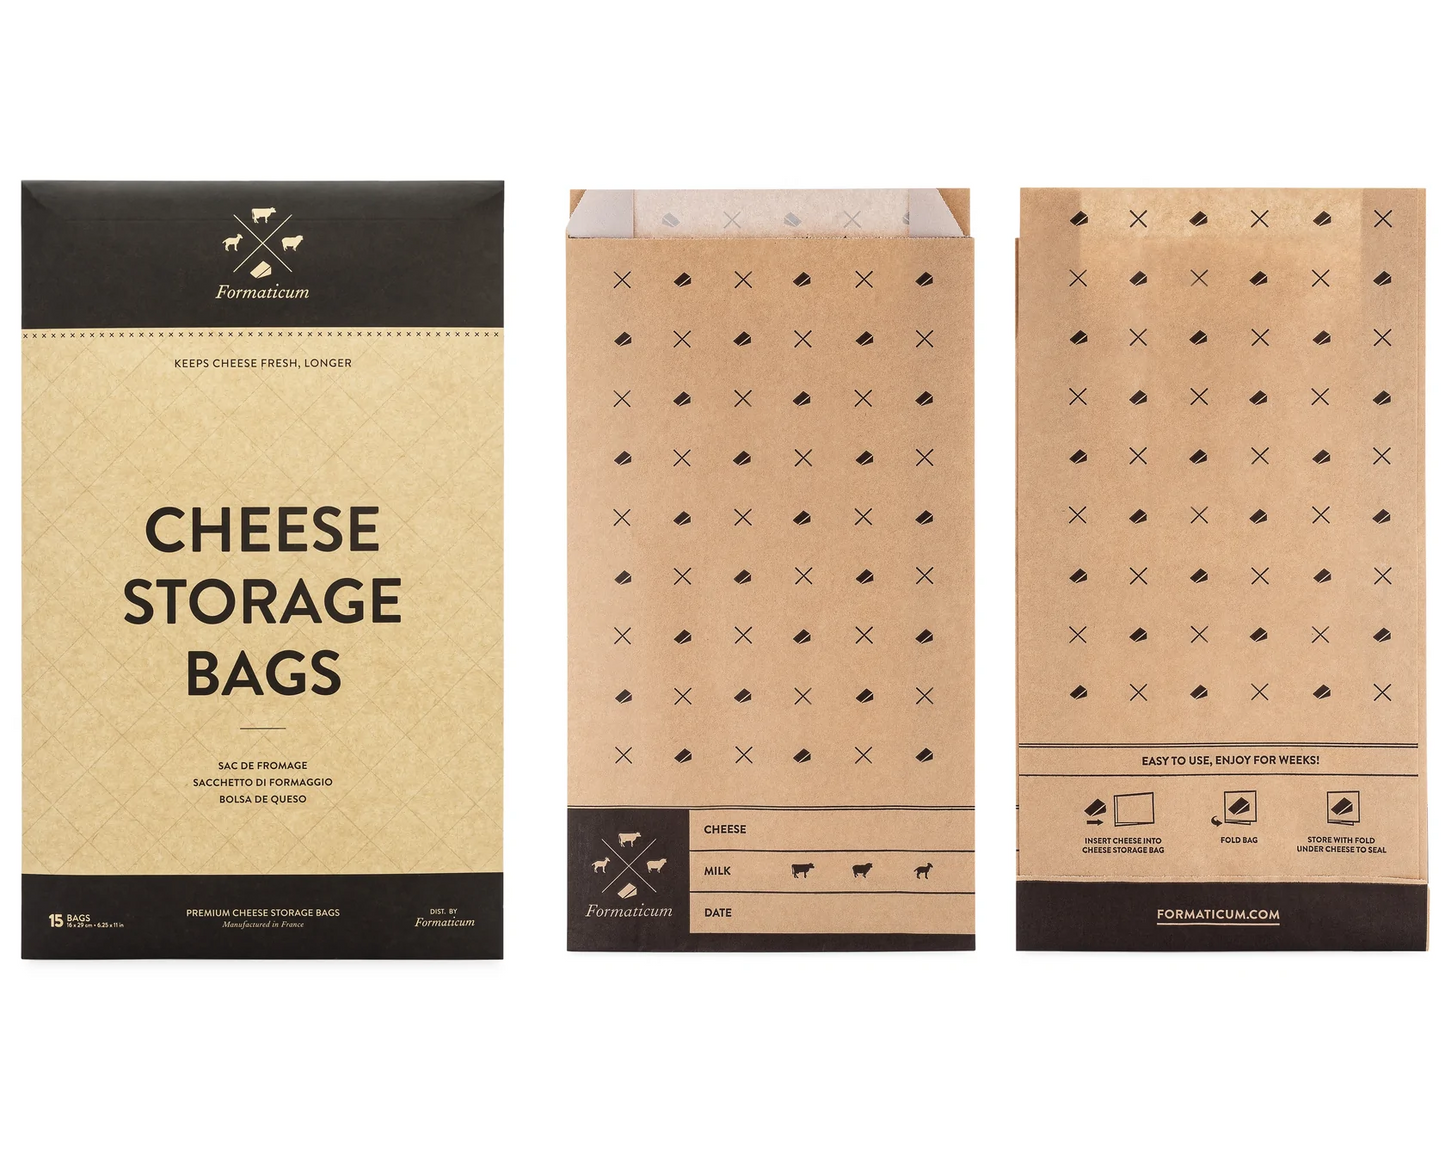 Cheese Storage Bags Kitchen Tools Formaticum